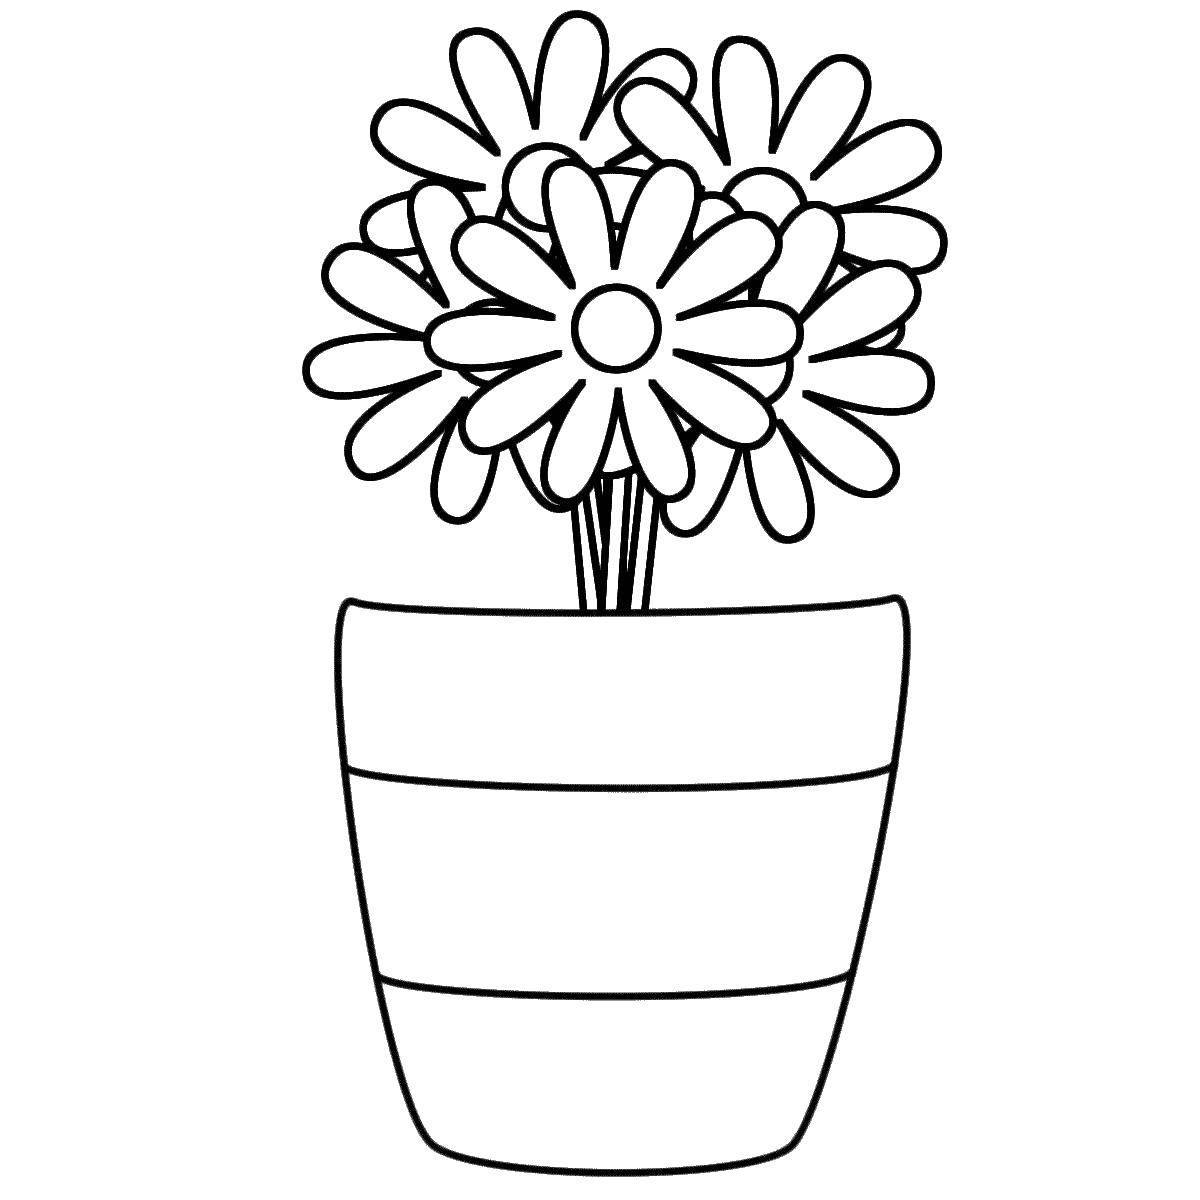 Coloring Vase with daisies. Category Vase. Tags:  daisies, vase.